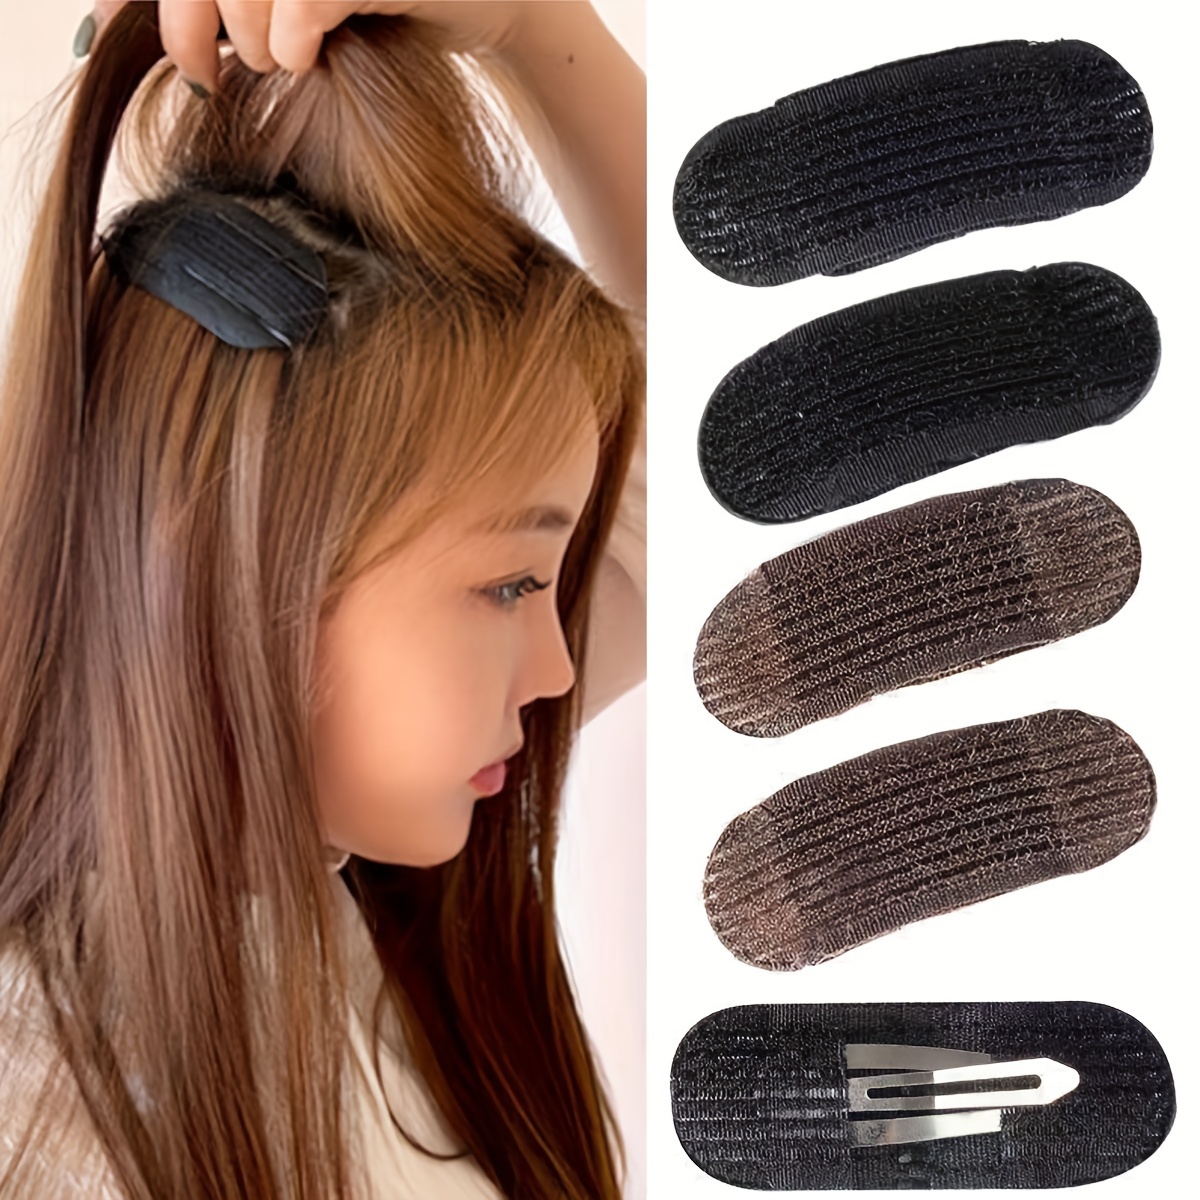 

2pcs Invisible Hair Volumizing Clip Set, Simple Women's Seamless Root Fluffing Styling Boost Pads, Essential Hair Accessory For Bangs And Hair Volume Enhancement